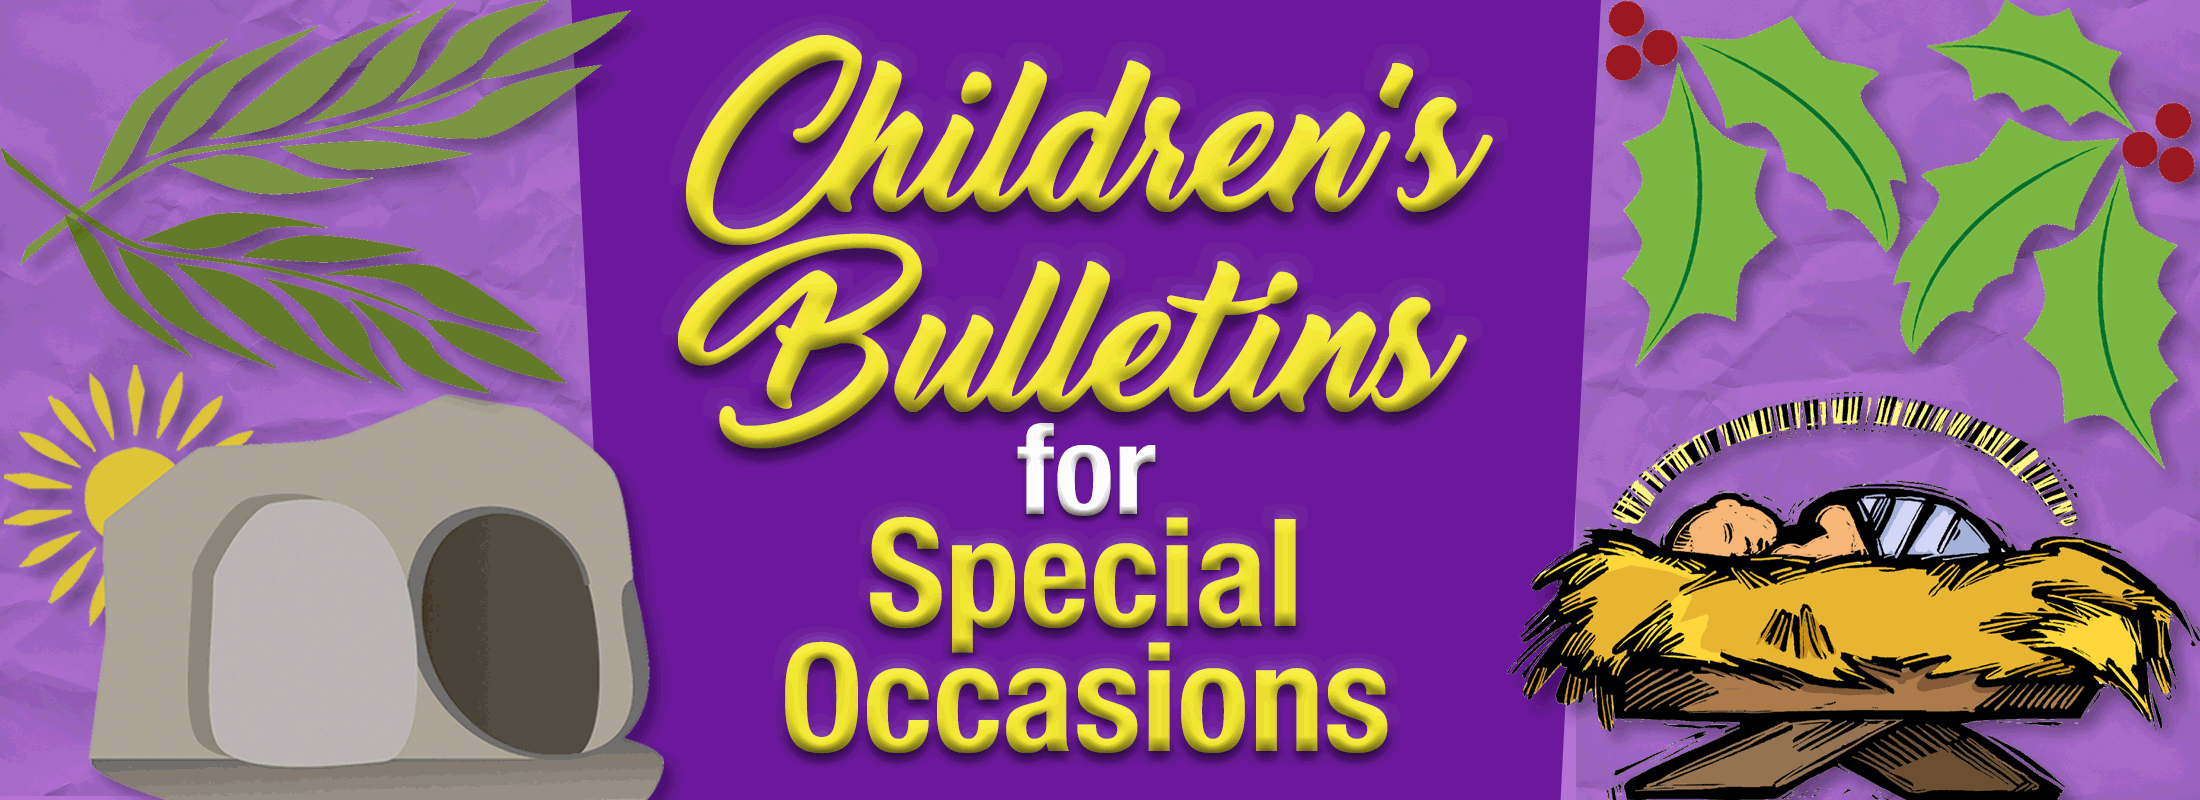 Children's Church bulletins banner image showing various special occasions.